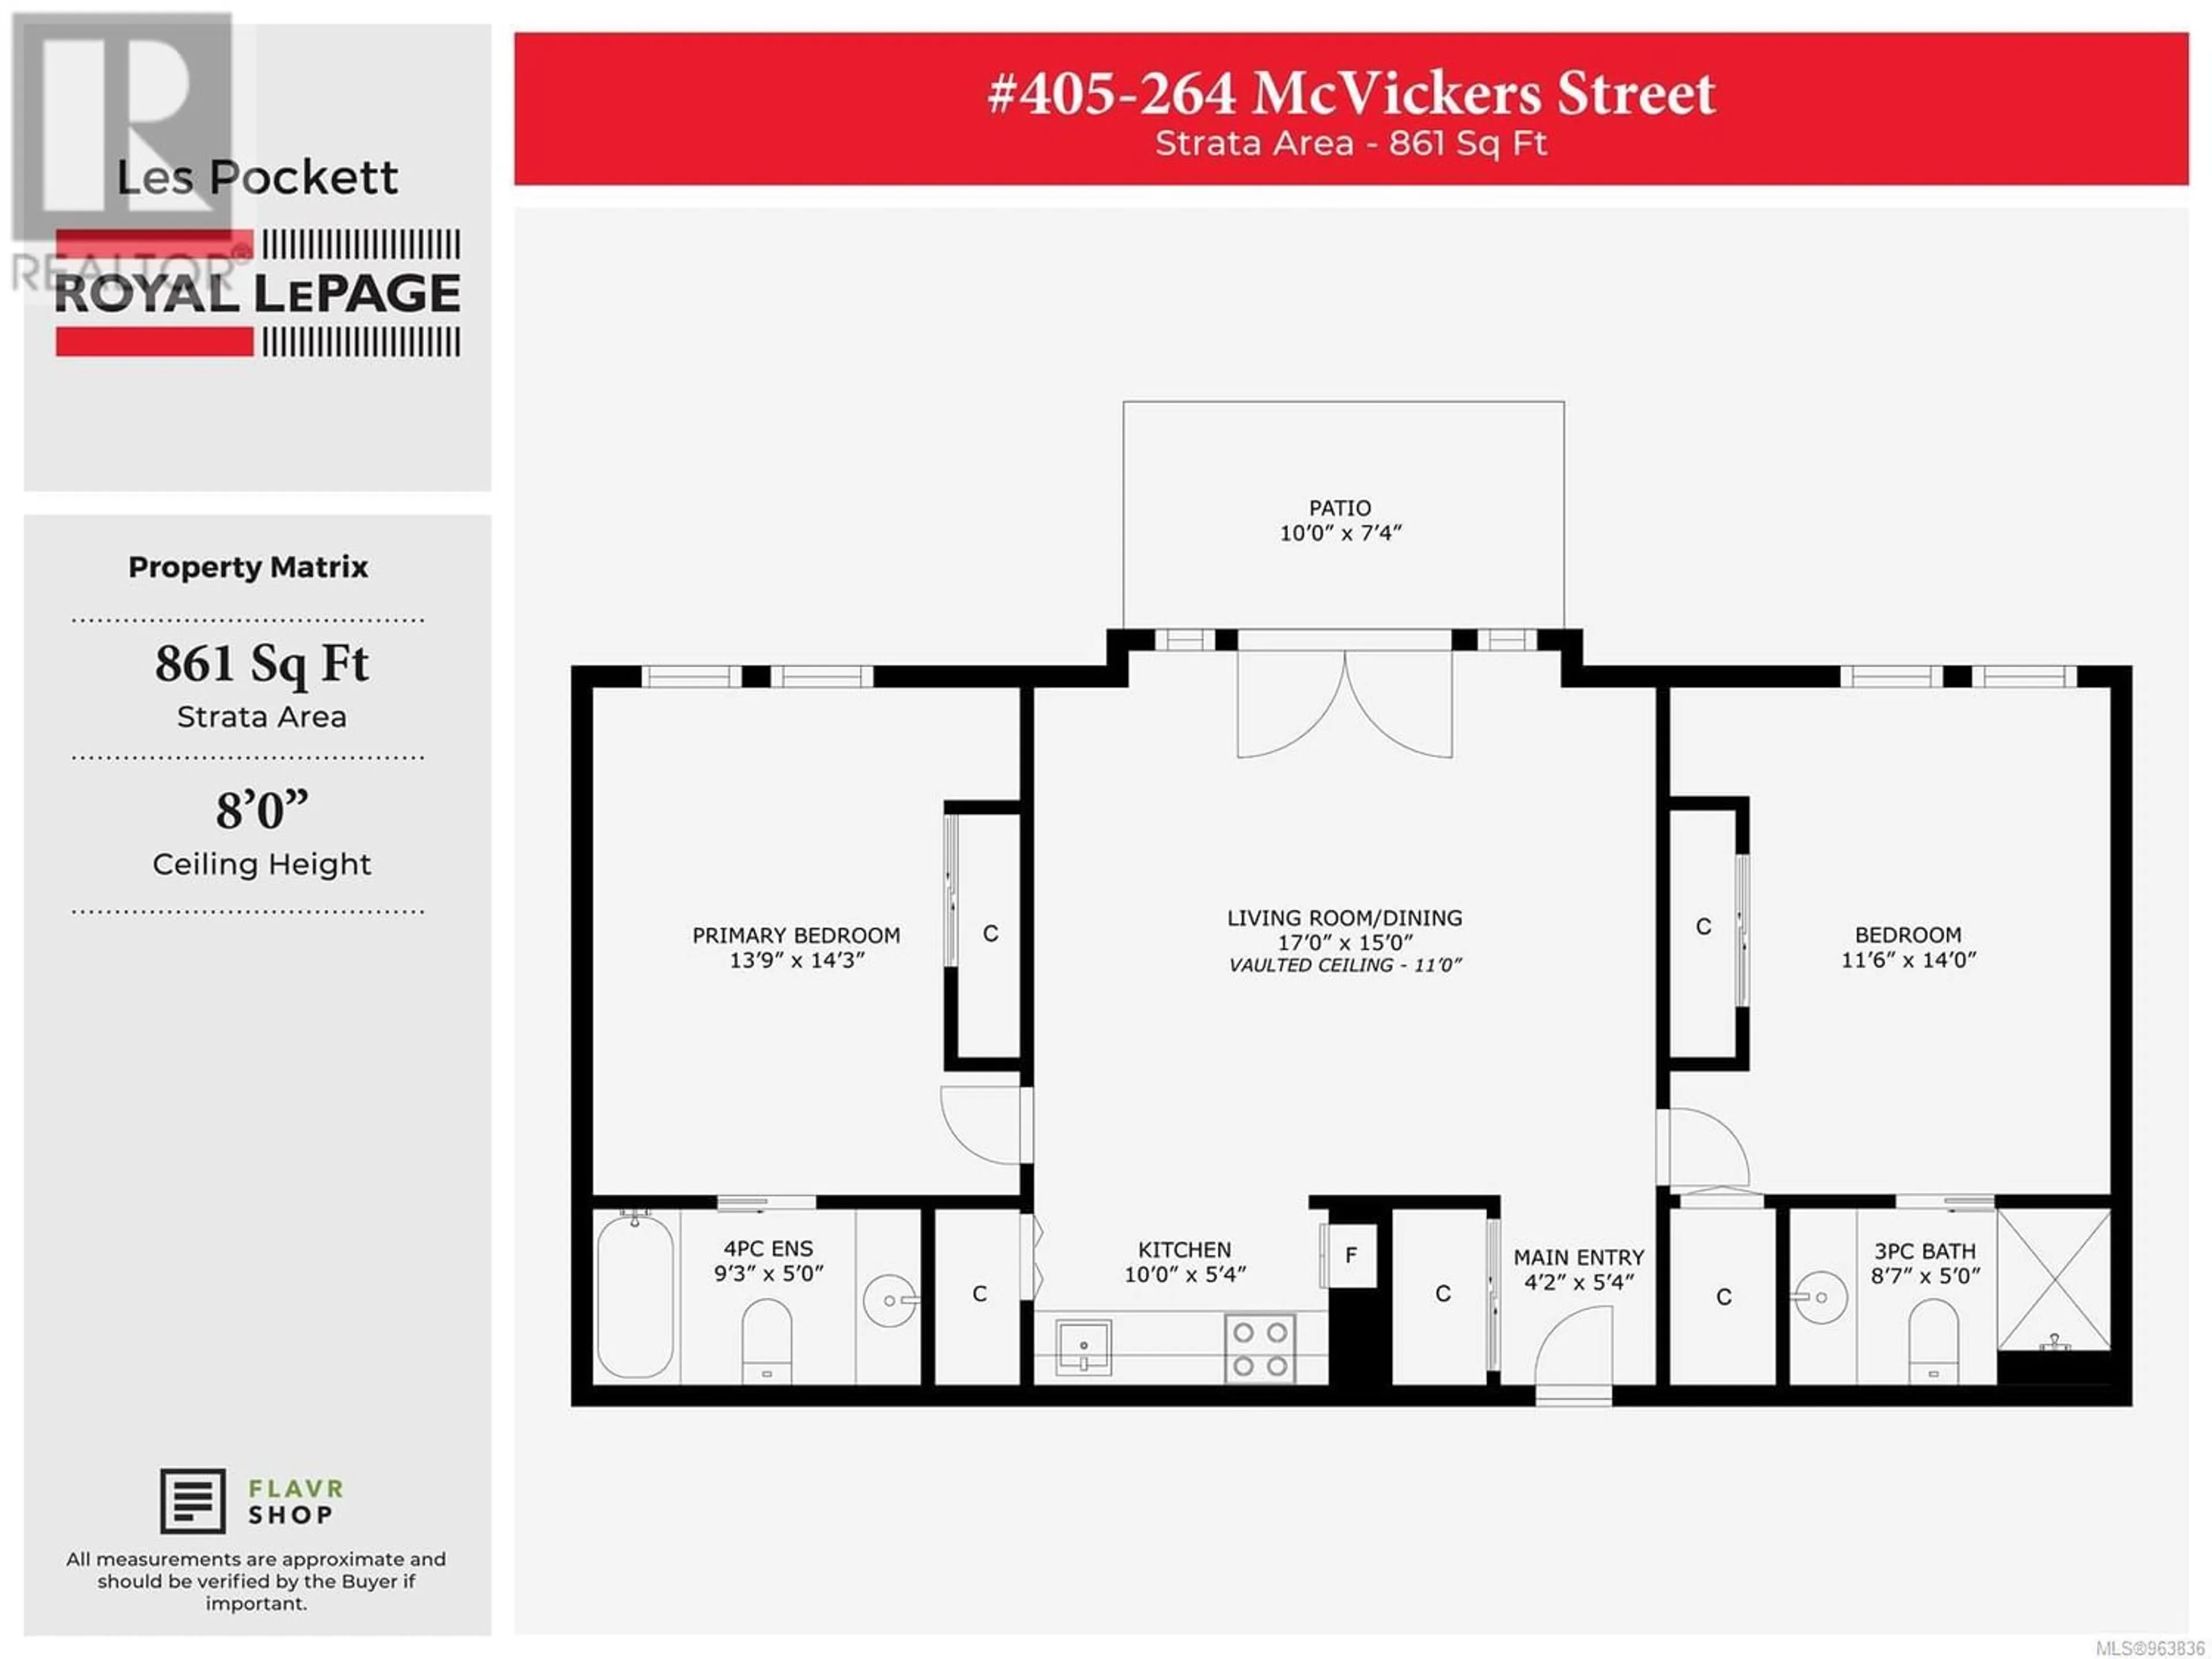 Floor plan for 405 264 McVickers St, Parksville British Columbia V9P2N5